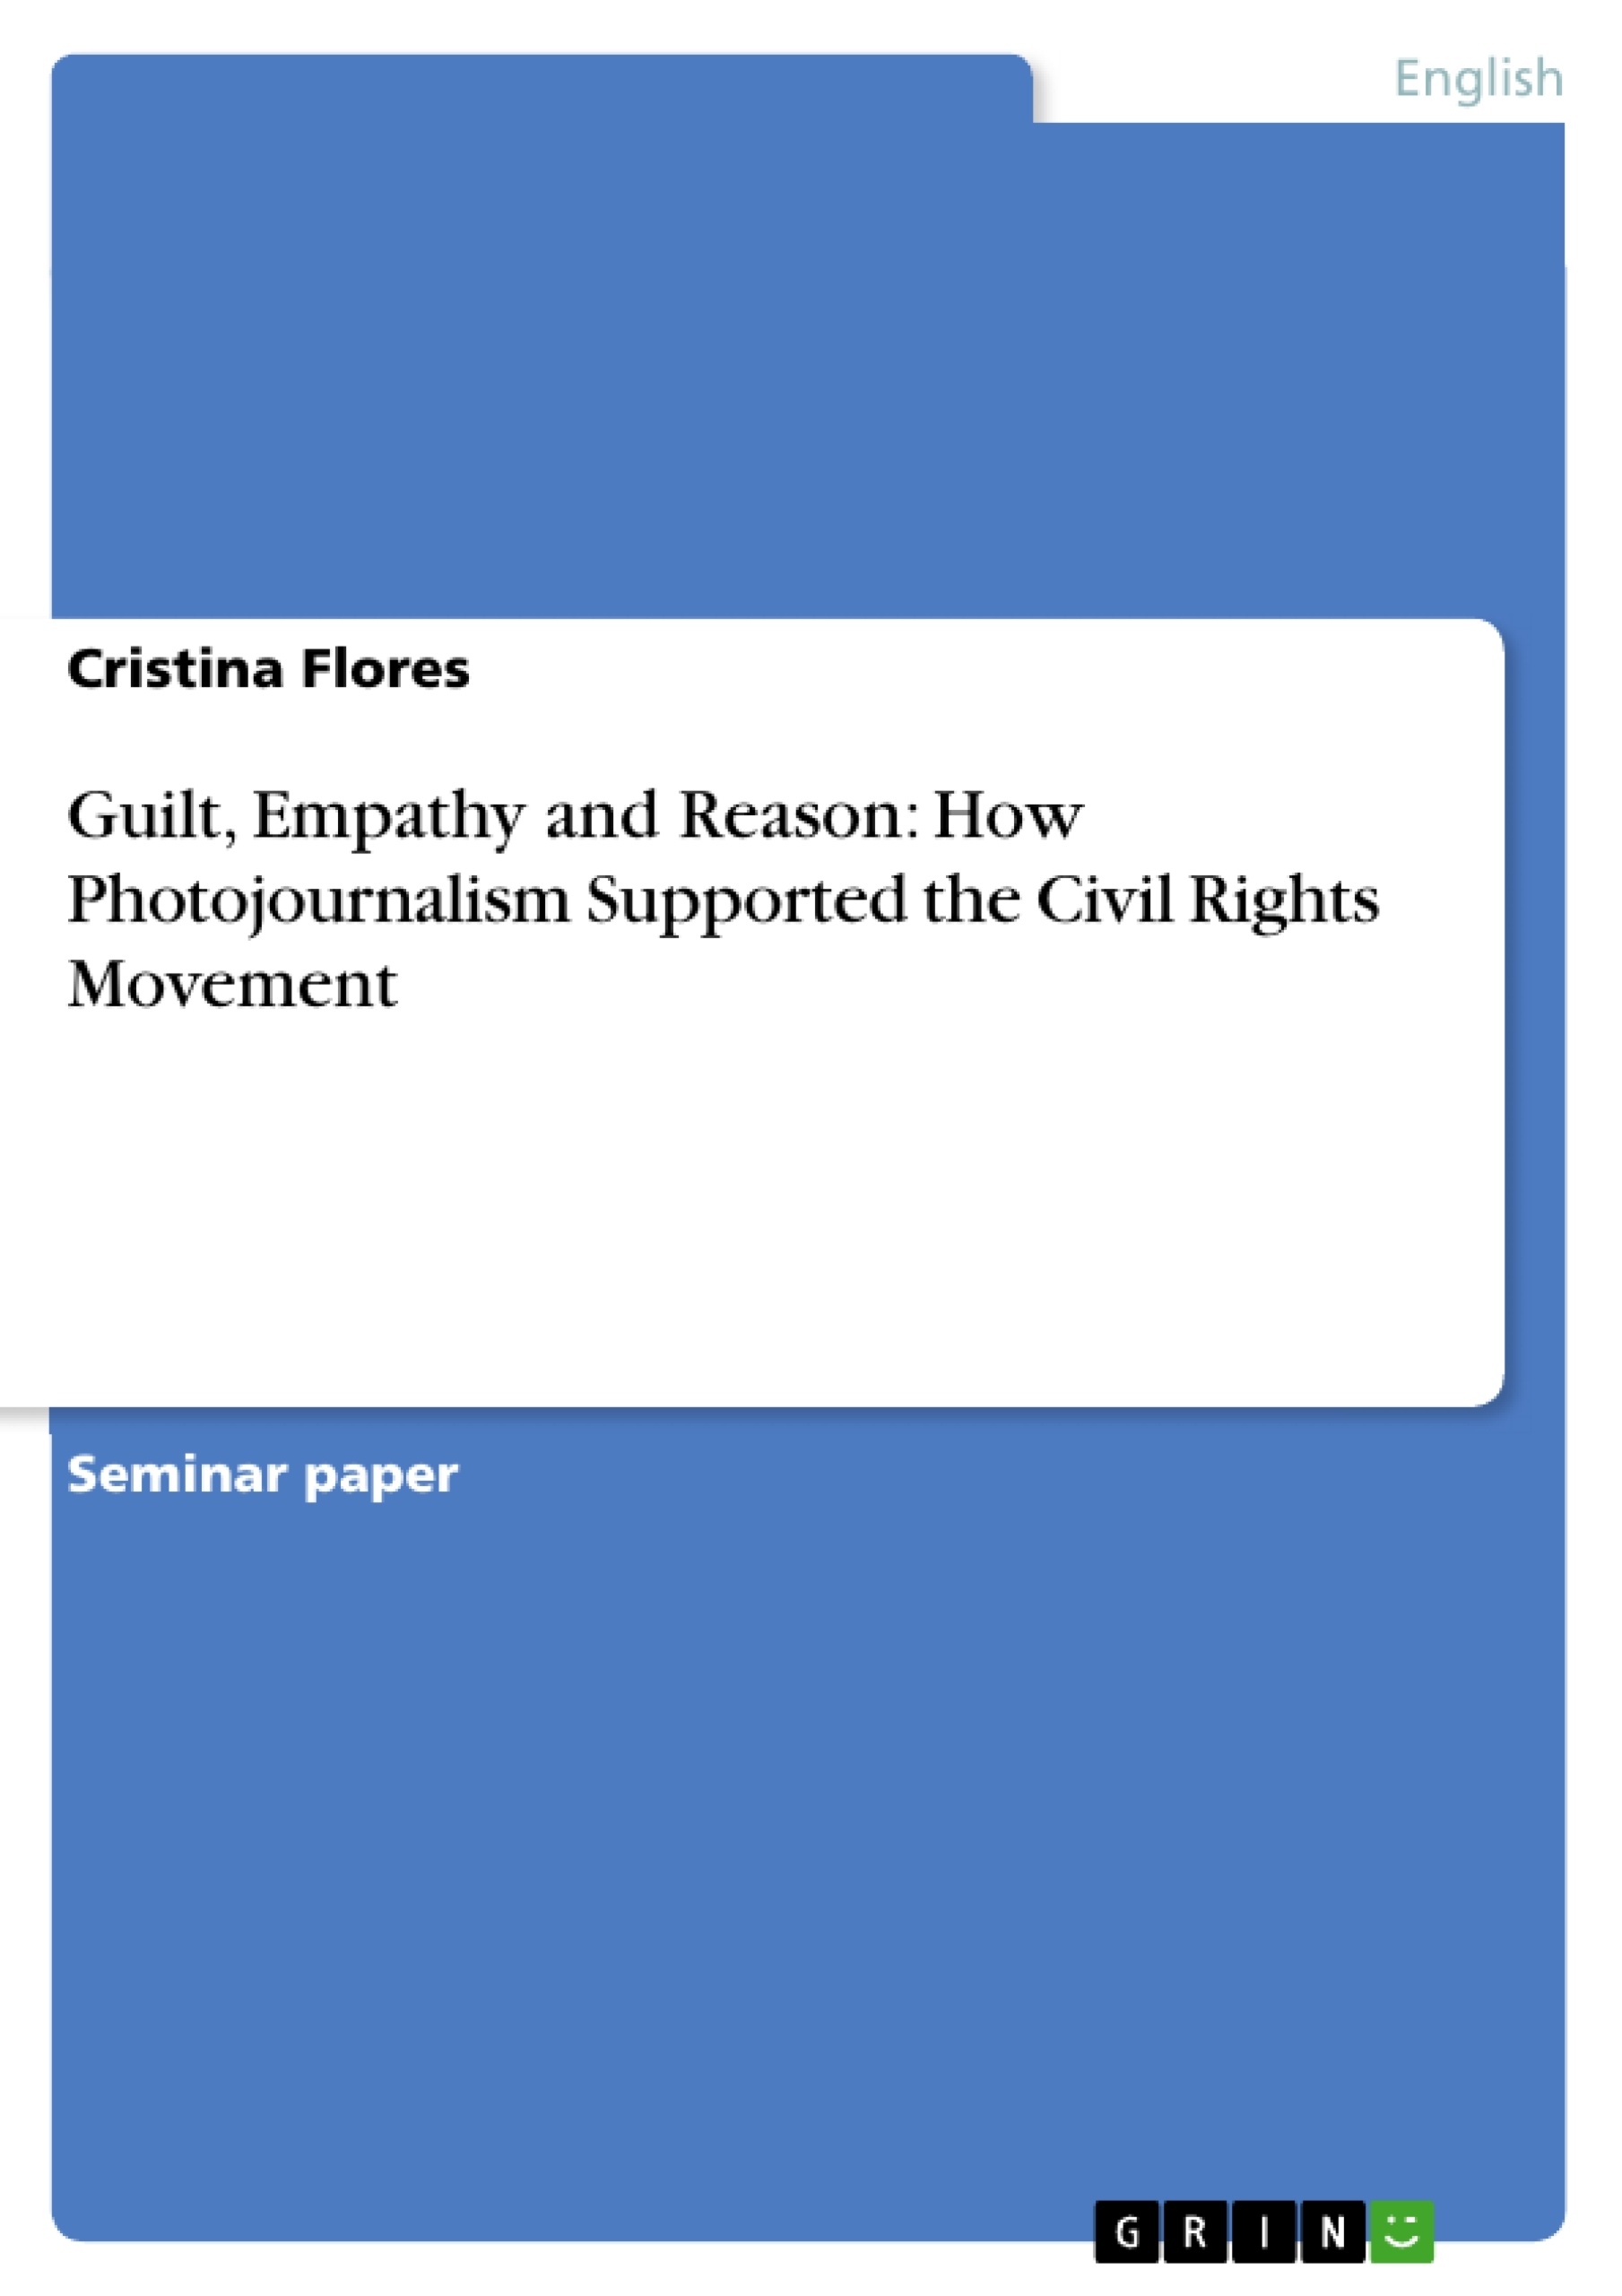 Título: Guilt, Empathy and Reason: How Photojournalism Supported the Civil Rights Movement